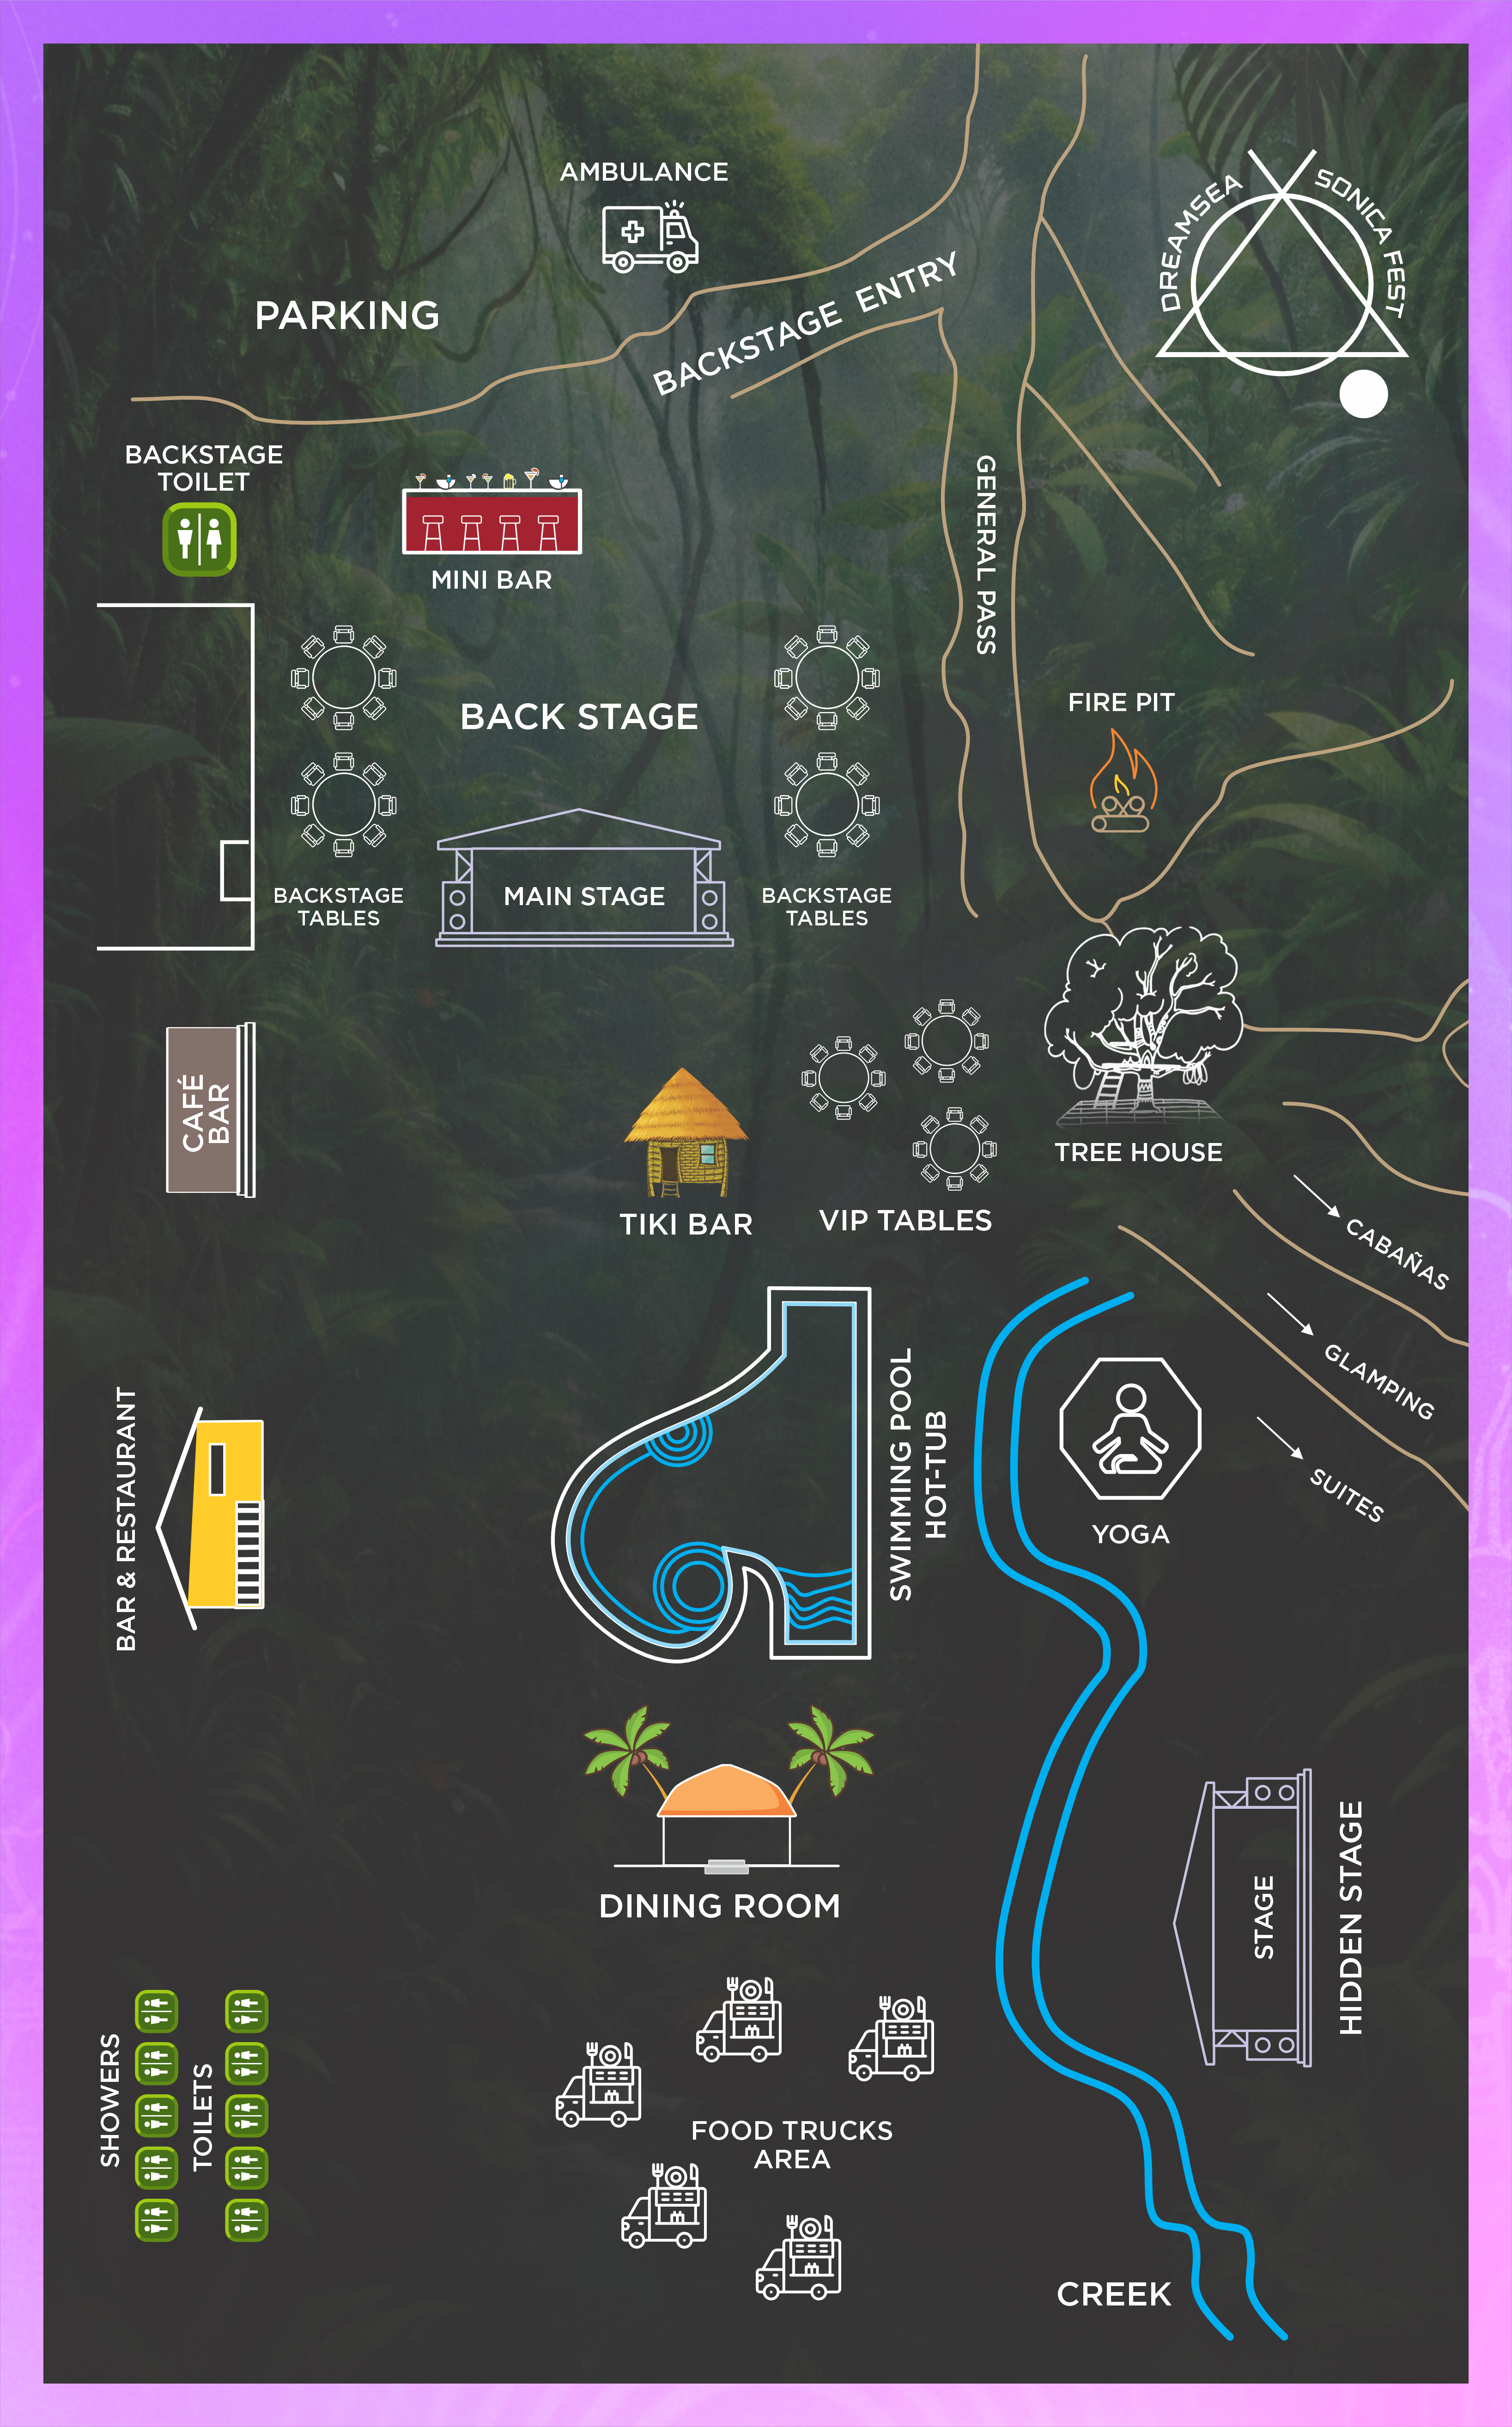 Dreamsea Costa Rica | Sonica Fest | Image | Image of a Map showing the layout of the venue